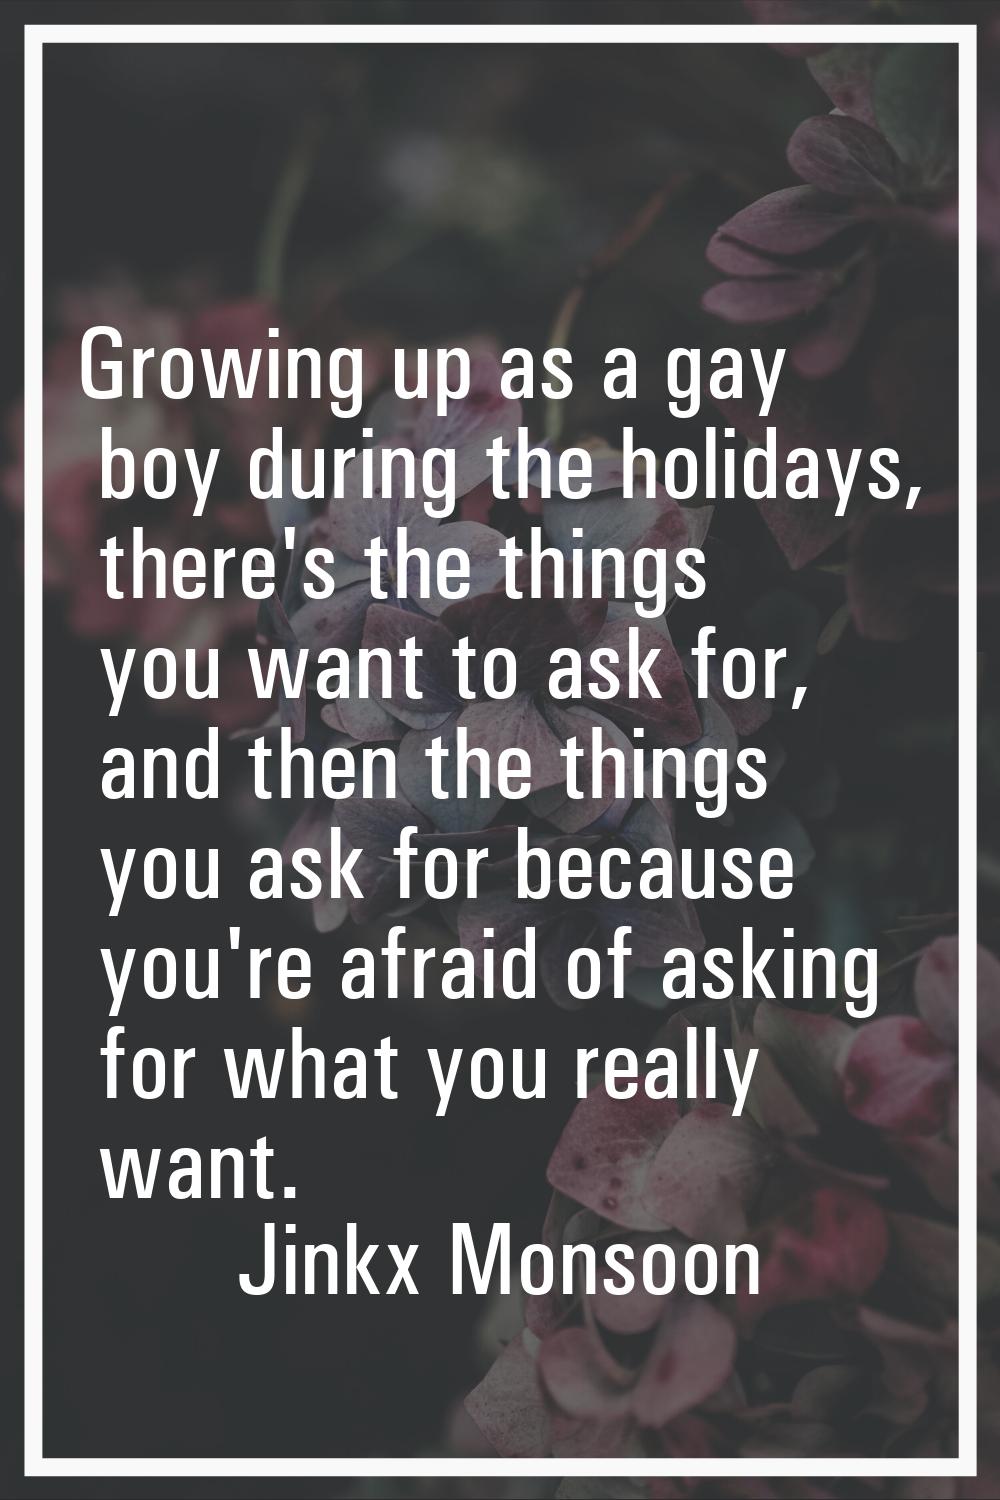 Growing up as a gay boy during the holidays, there's the things you want to ask for, and then the t